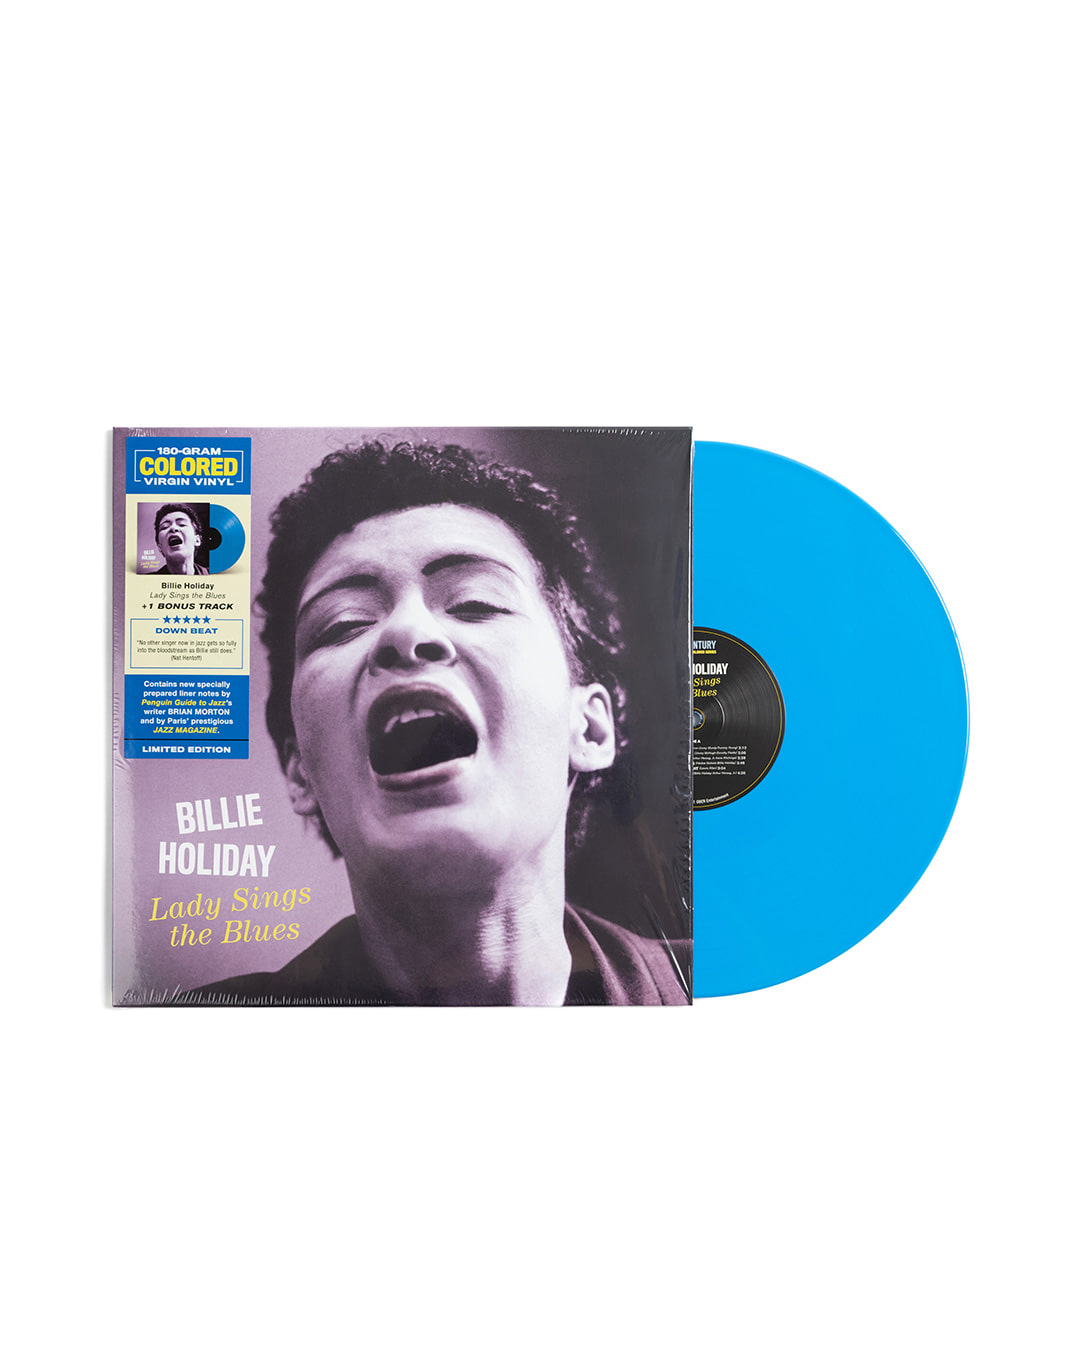 BILLIE HOLIDAY - LADY SINGS THE BLUES (blue disc)